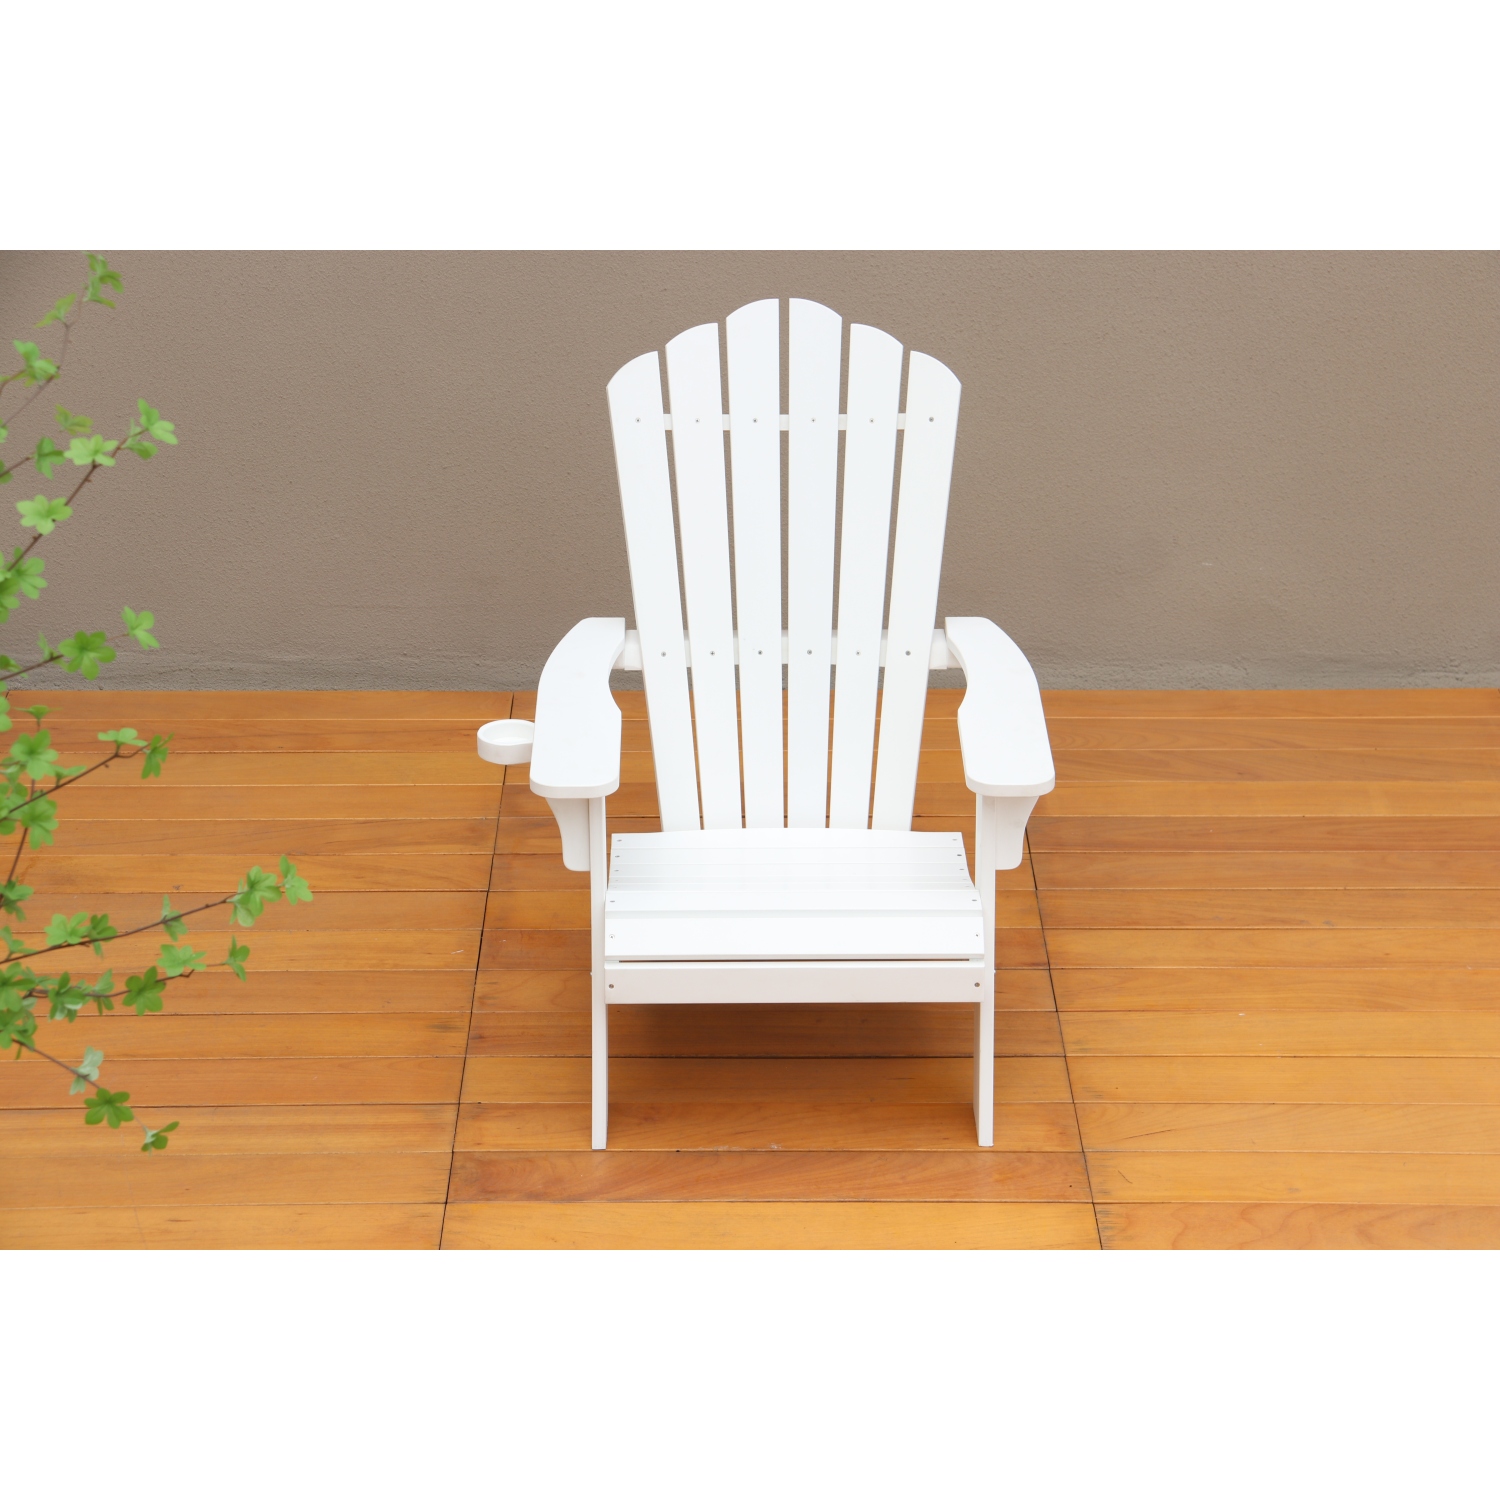 SUGIFT Adirondack Chair Backyard Outdoor Furniture,Patio Seating with Cup Holder,Fade-Resistant Plastic Wood for Lawn Patio Deck Garden Porch Lawn Furniture Chair,White - image 2 of 8